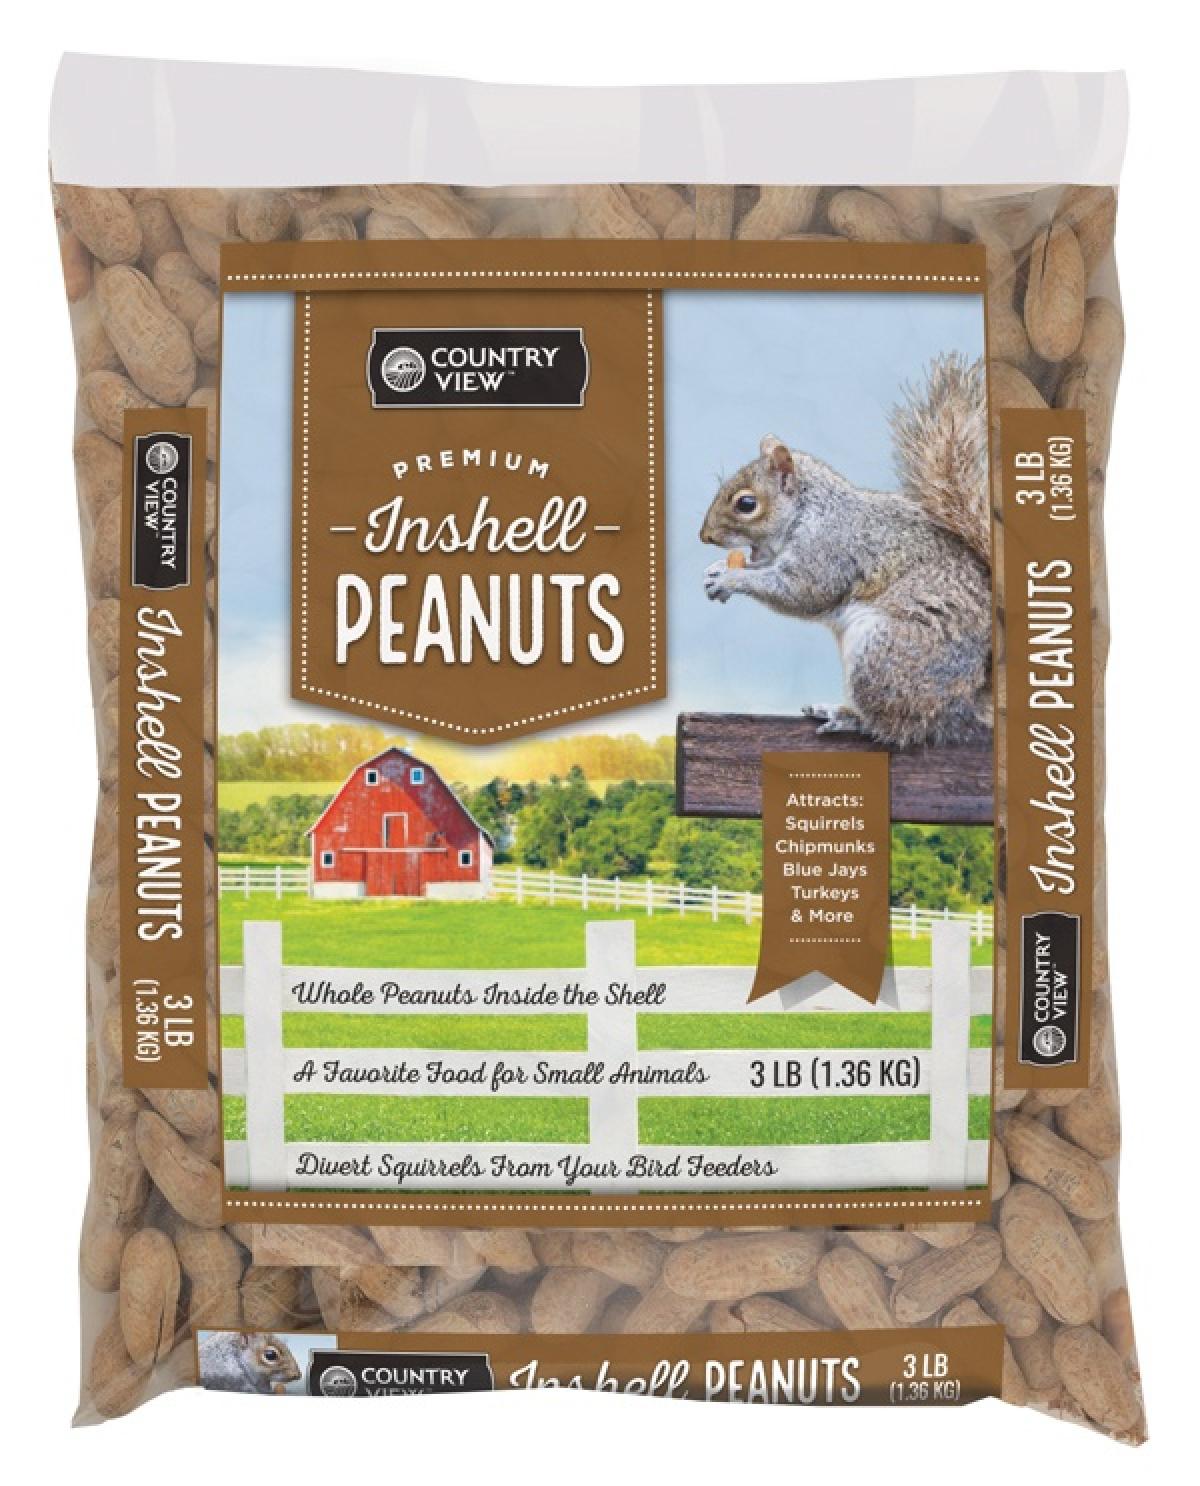 Country View Inshell Peanuts